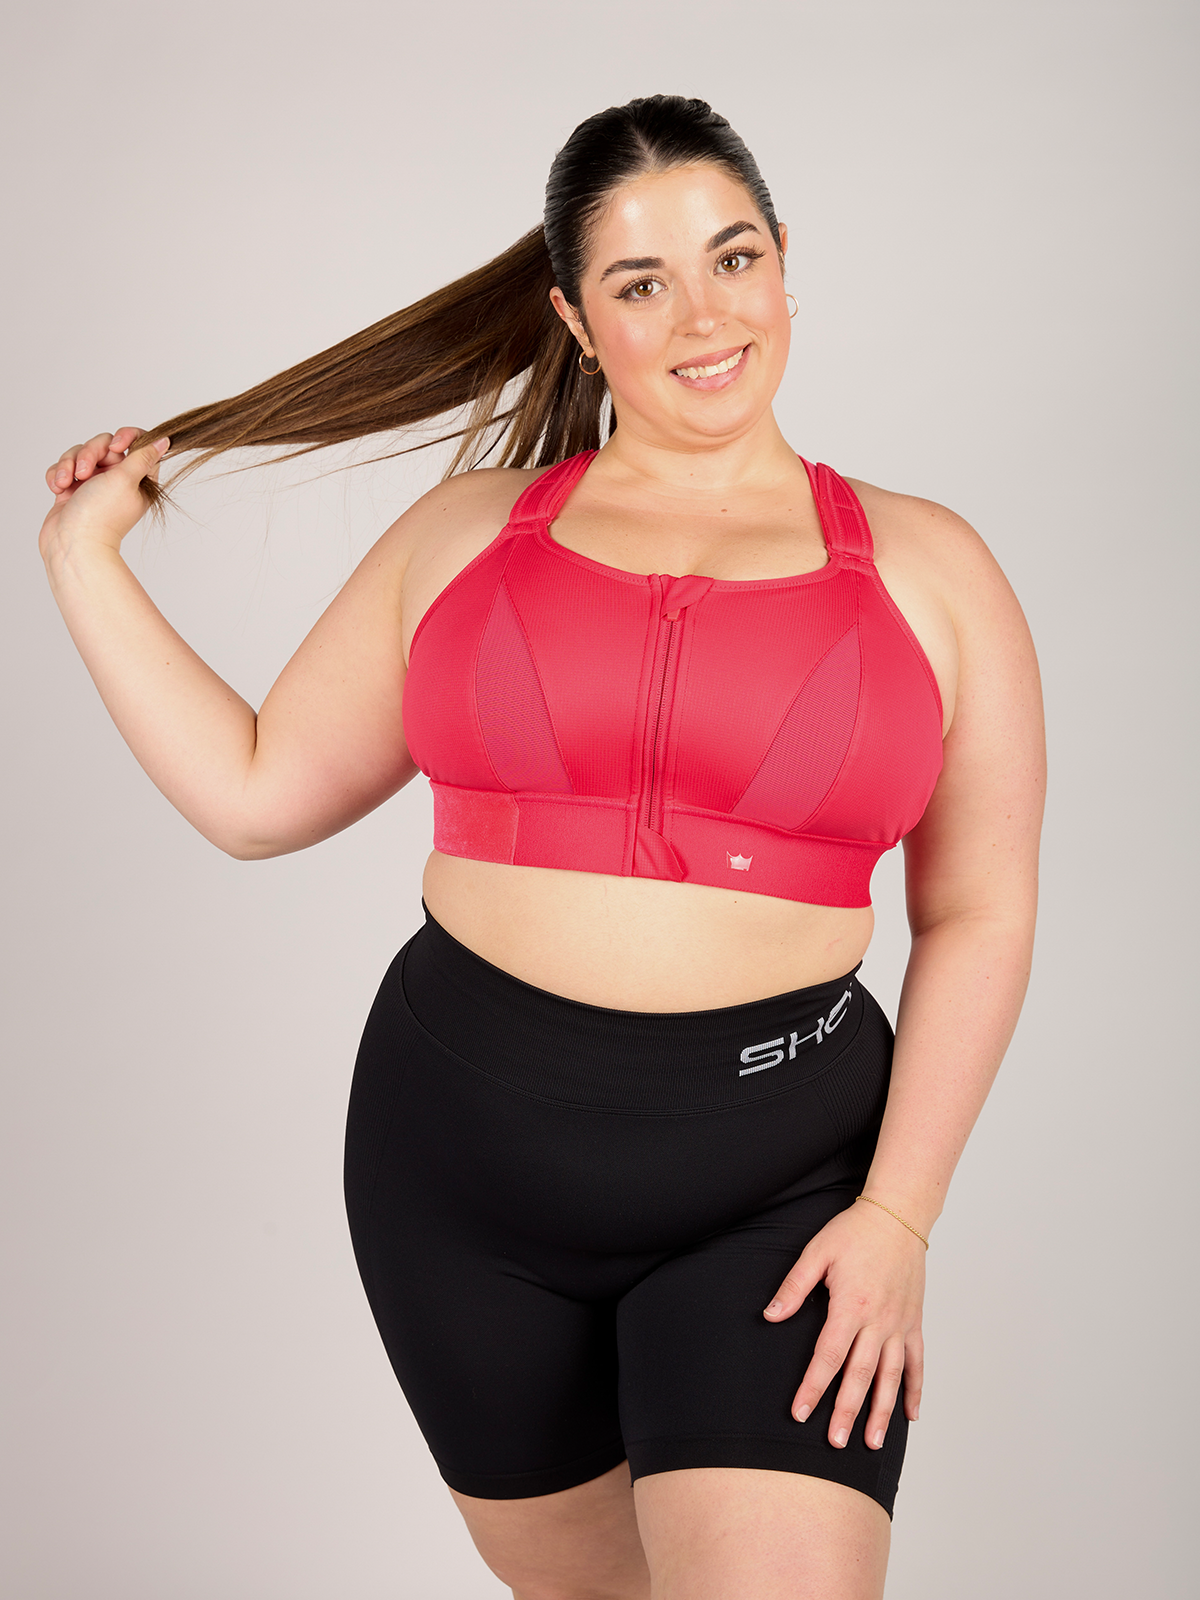 TANFIT SHOP  STYLISH ACTIVEWEAR MADE WITH MODERN TECHNOLOGY – Tanfit Shop